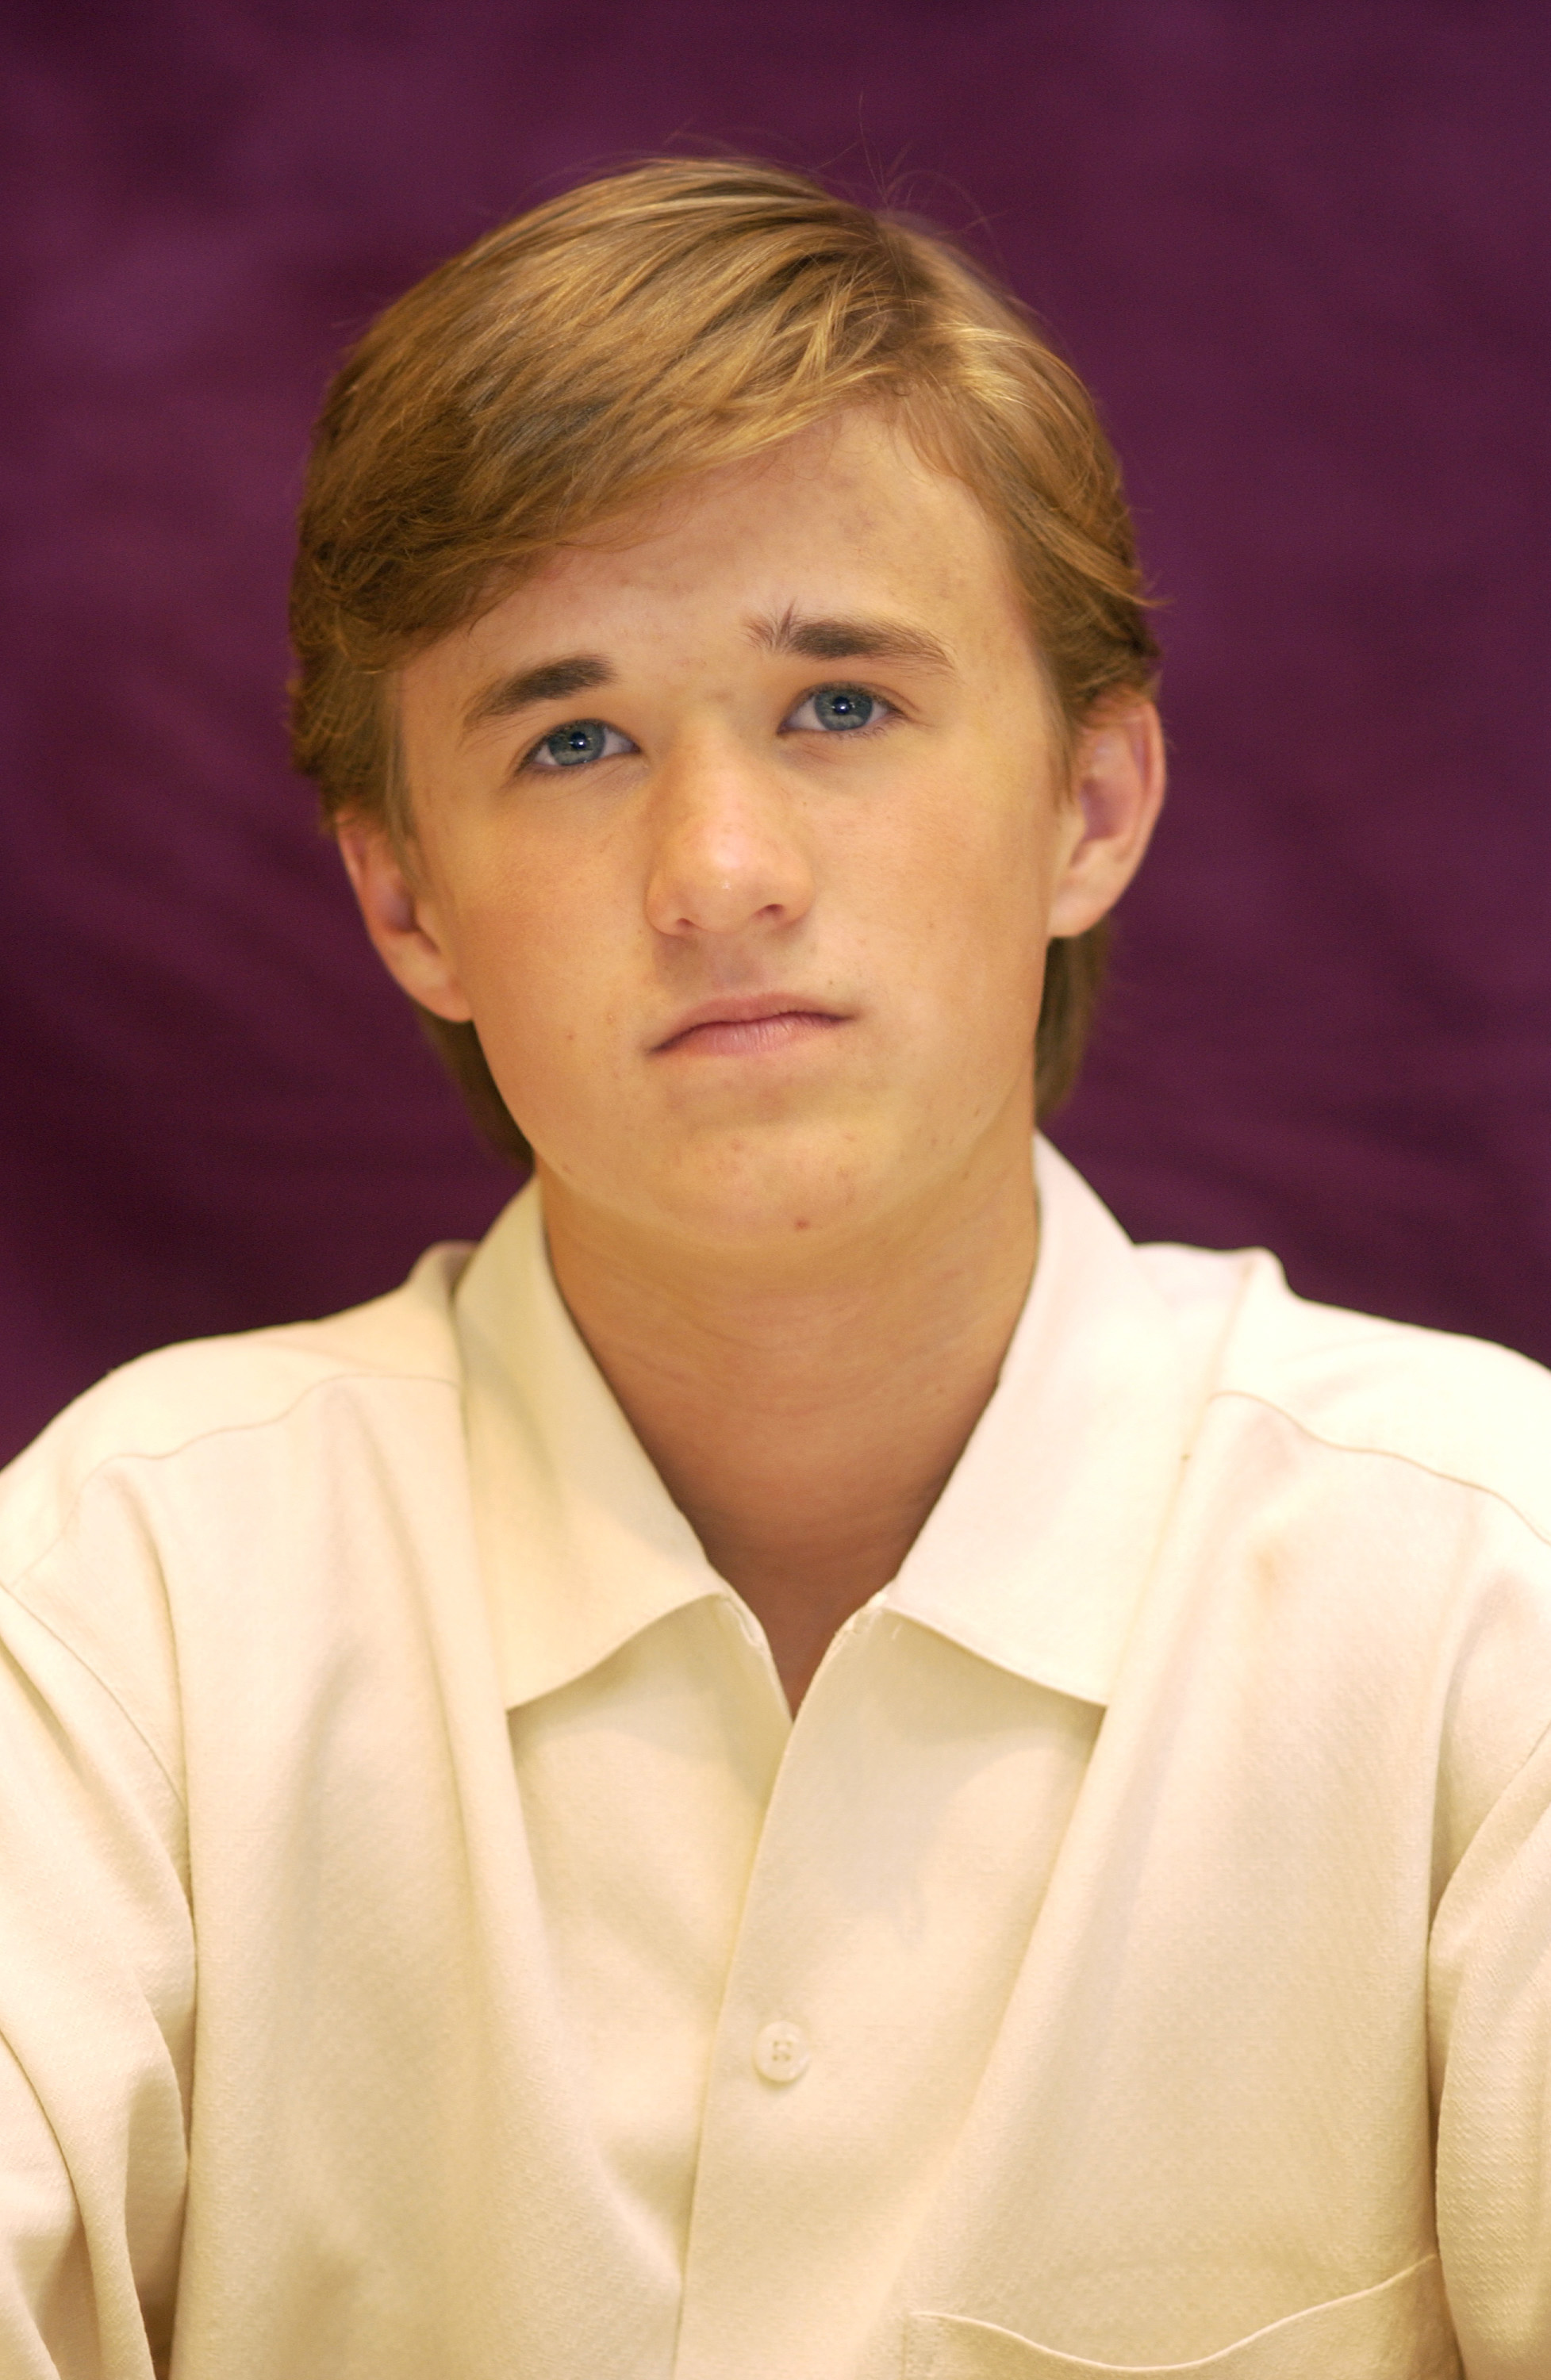 Haley Osment during "Secondhand Lions" press conference at The Four Seasons Hotel on August 10, 2003 in Beverly Hills, California. | Source: Getty Images